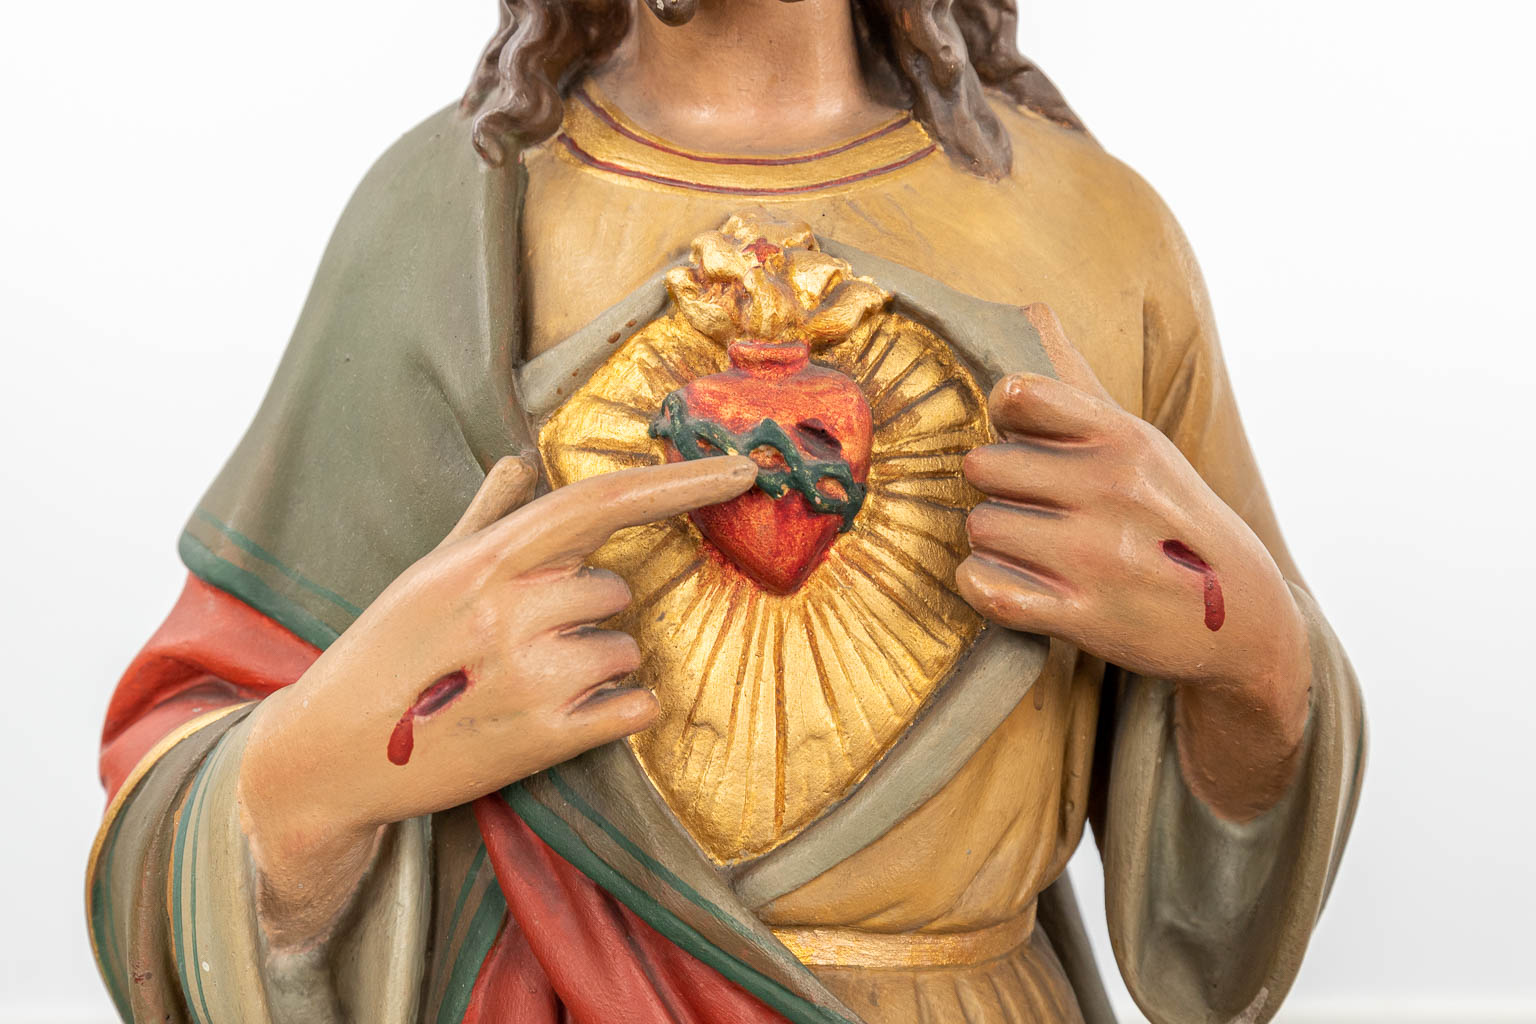 A collection of 3 large polychrome plaster statues of Jesus 